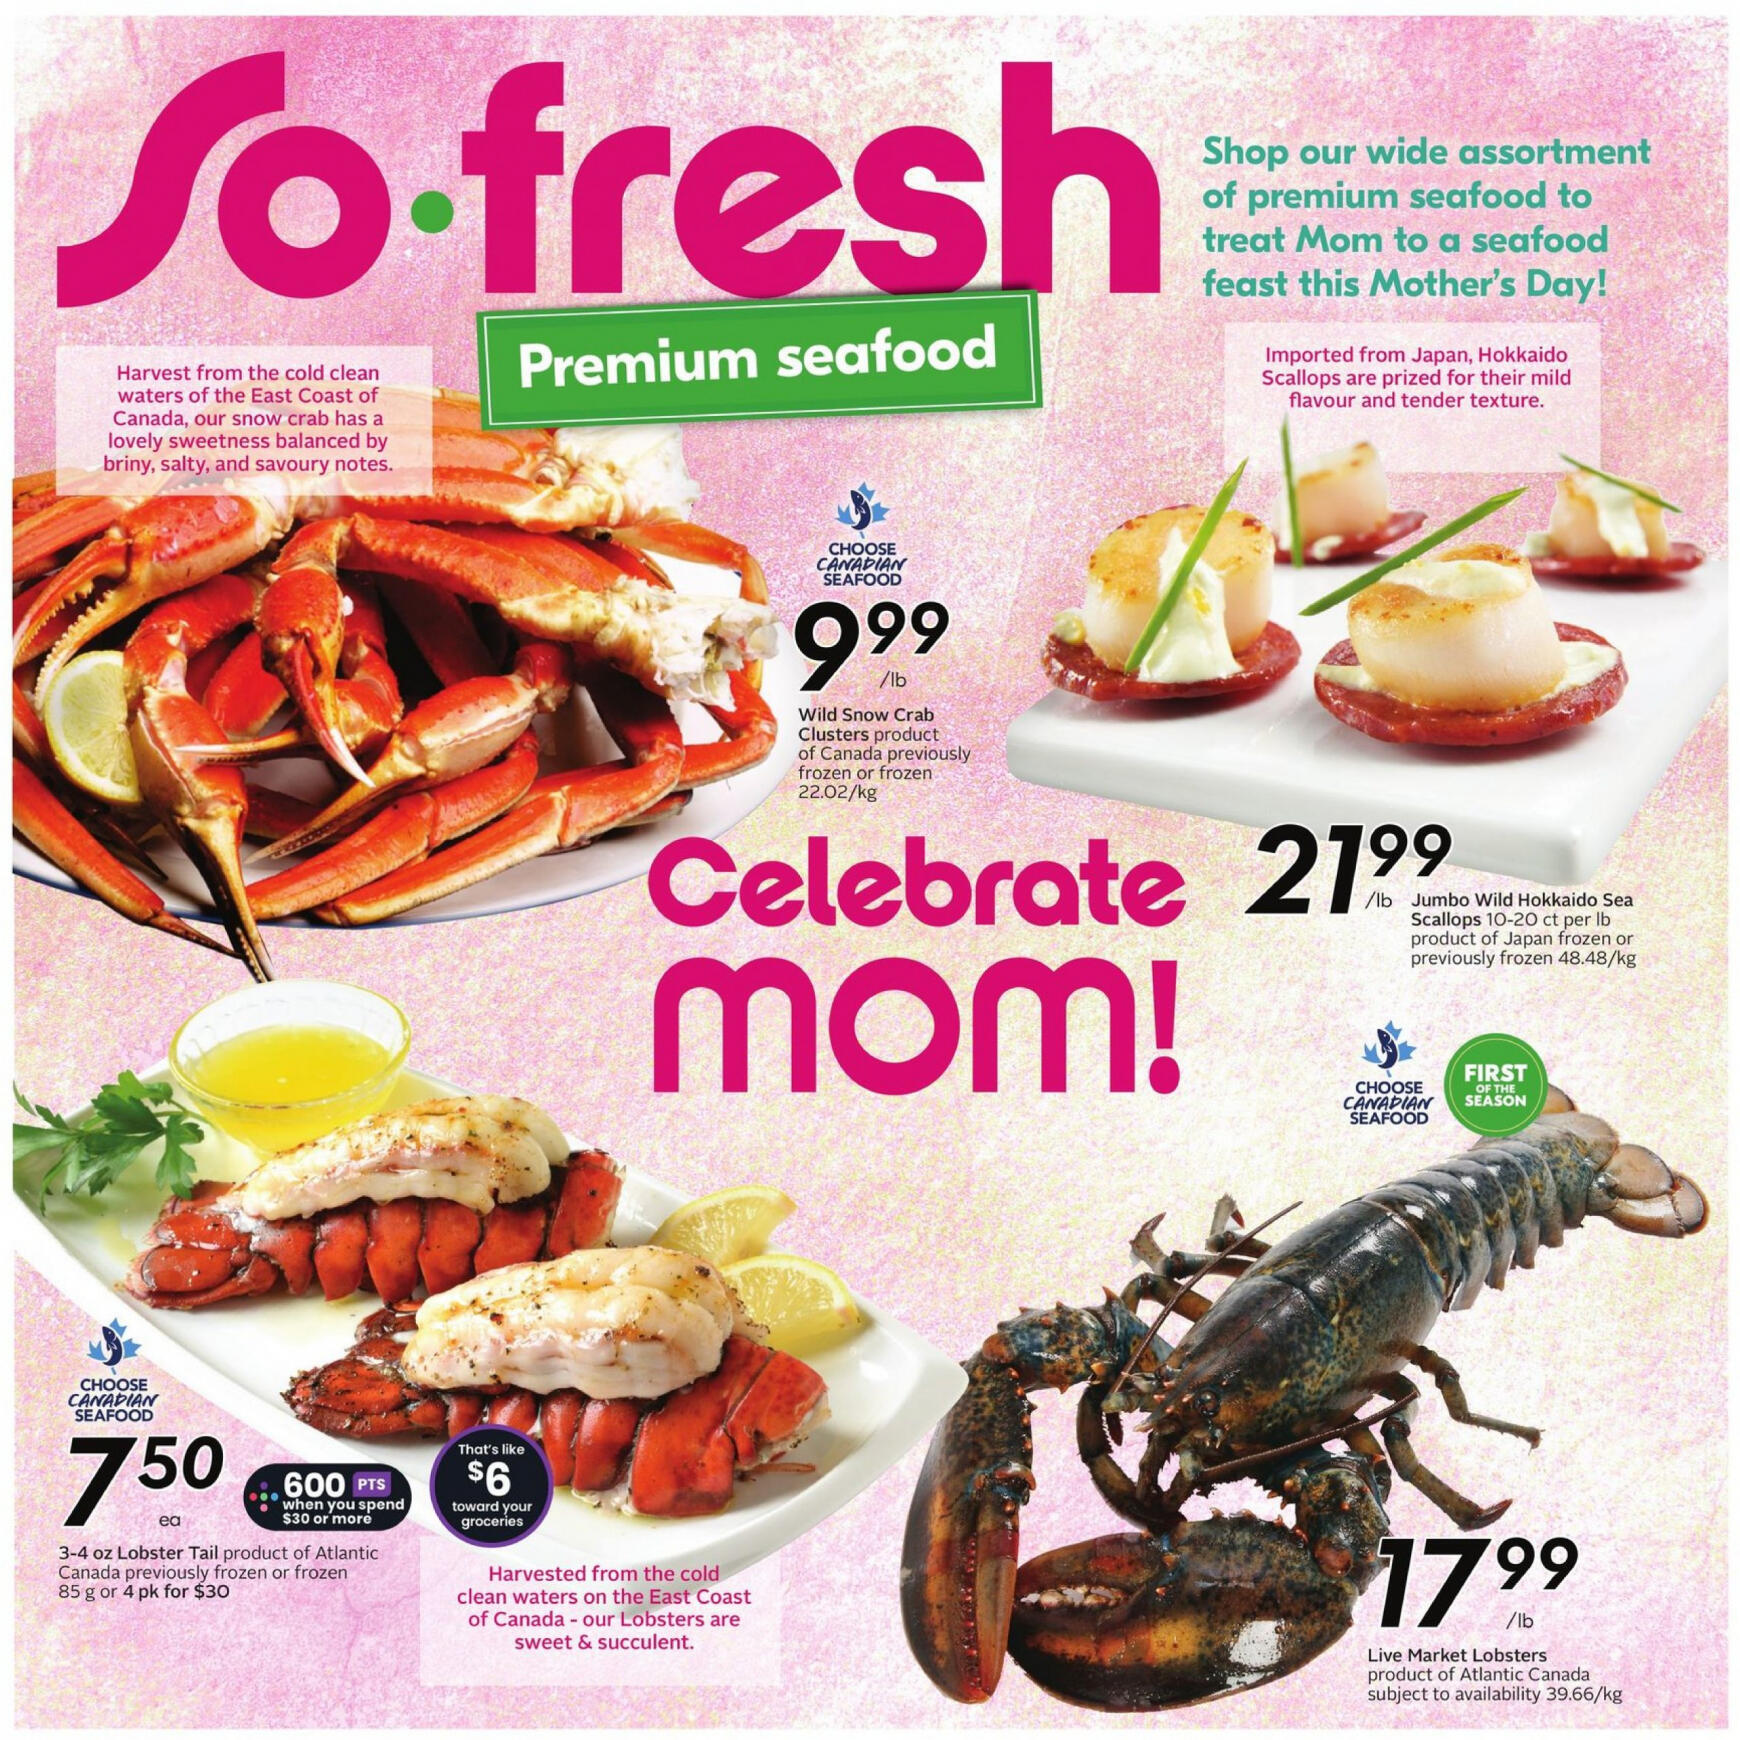 sobeys - Sobeys - Weekly Flyer - Ontario flyer current 09.05. - 15.05. - page: 8